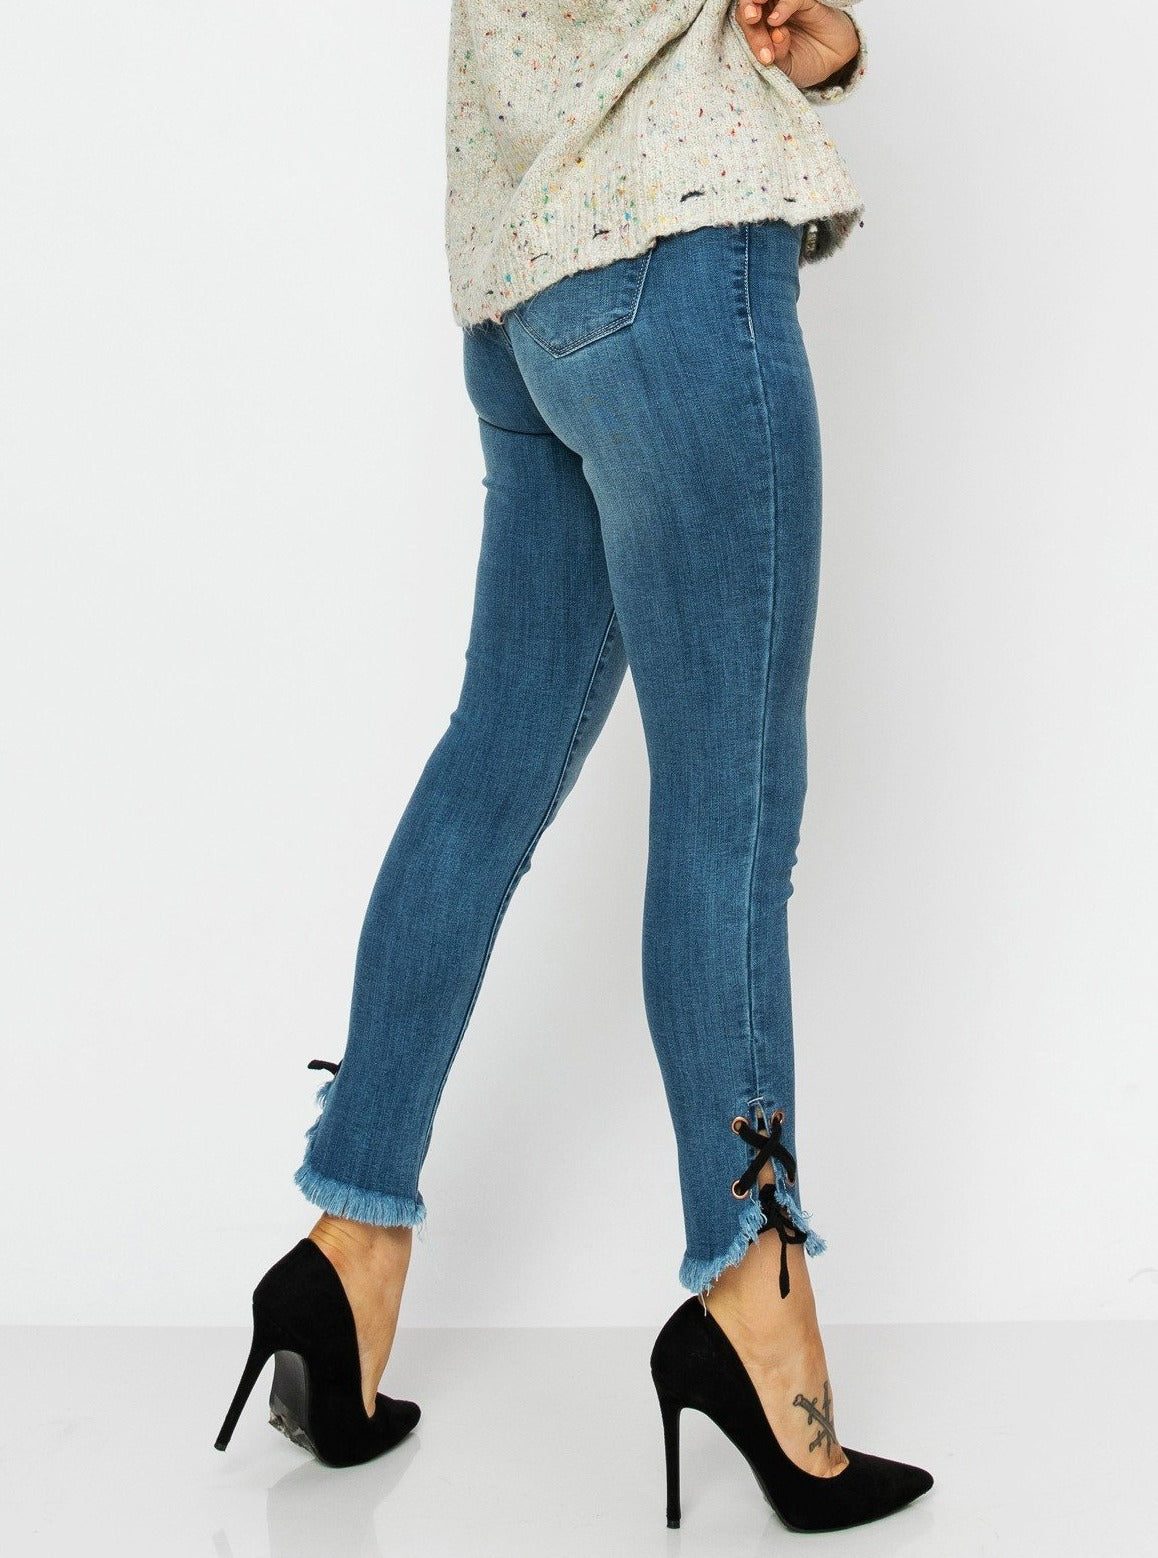 Bow Tie Jeans